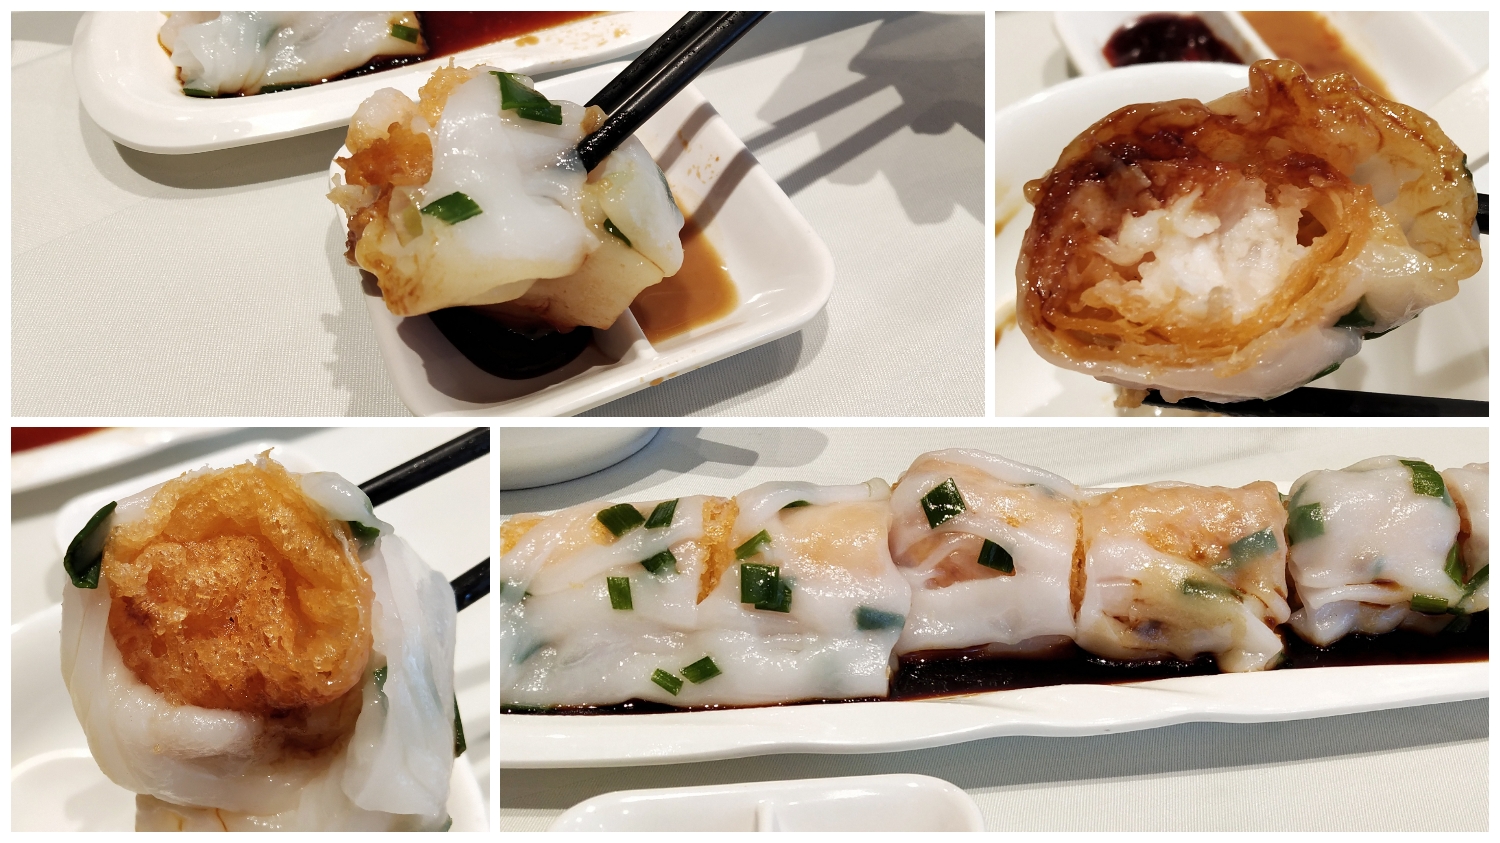 Share Frank's post about how to taste the steamed rice roll with fried dough stick